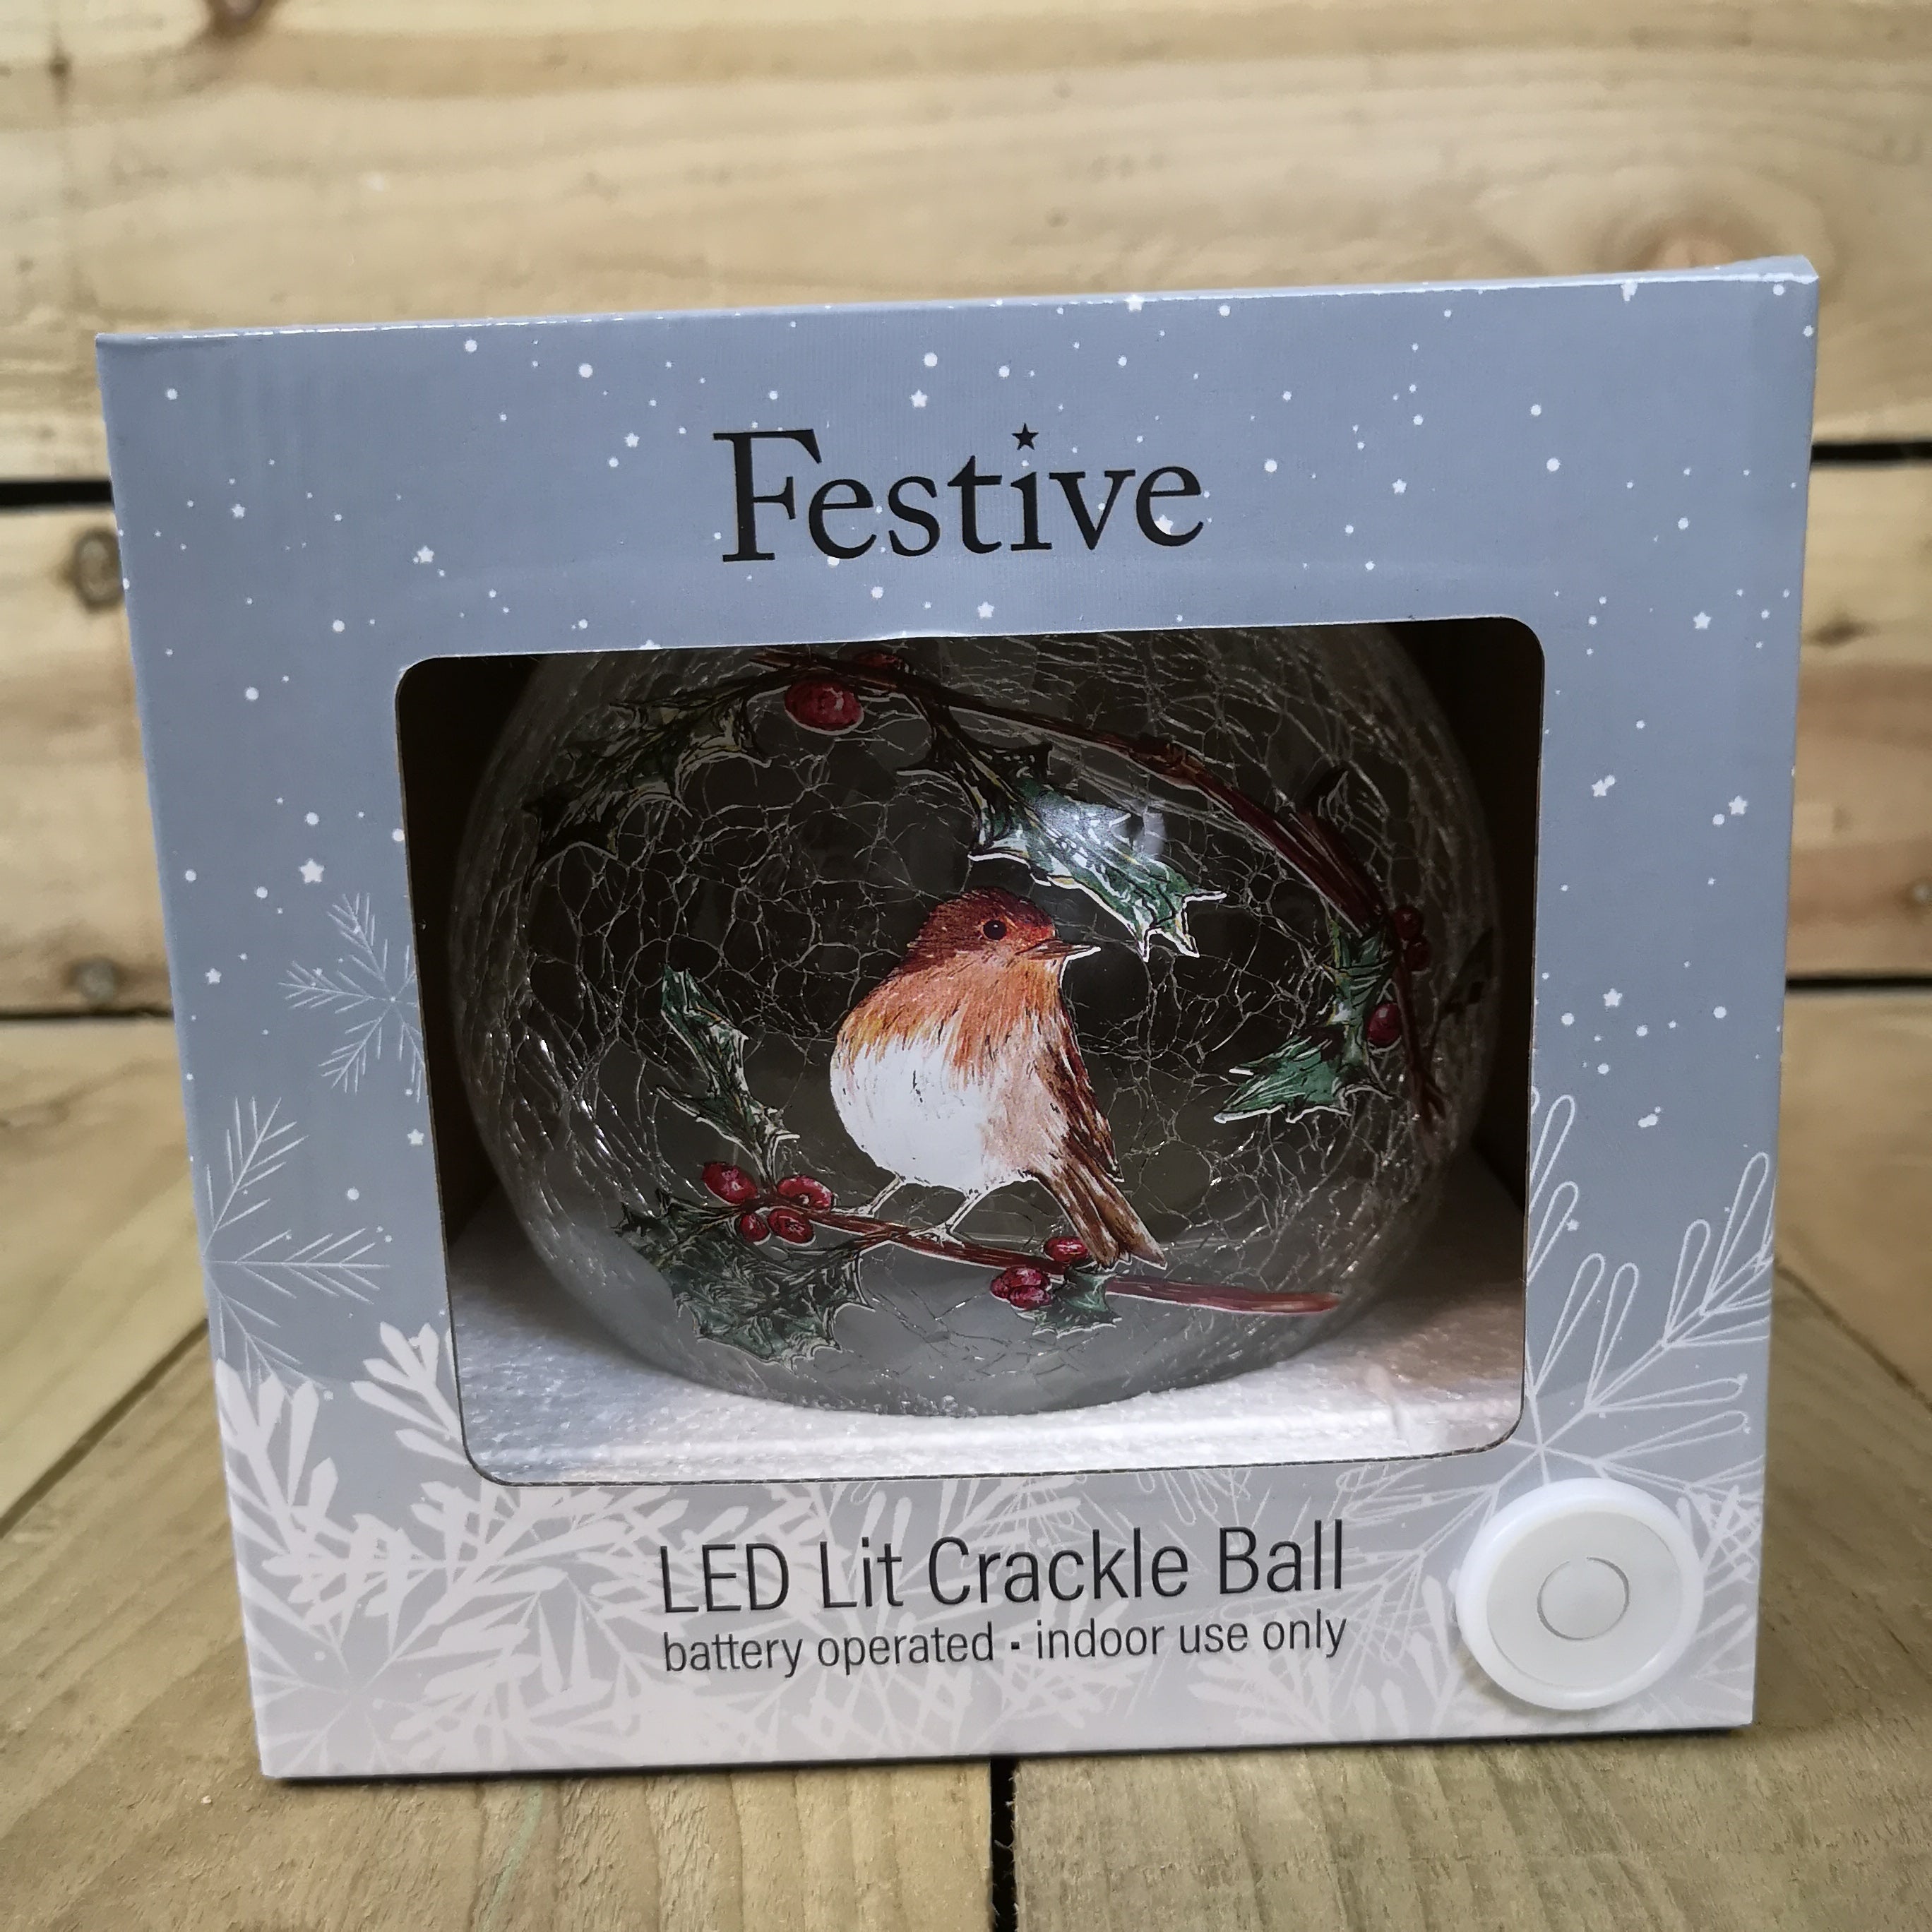 Festive 15cm Battery Operated Indoor Christmas LED Lit Crackle Effect Robin Ball